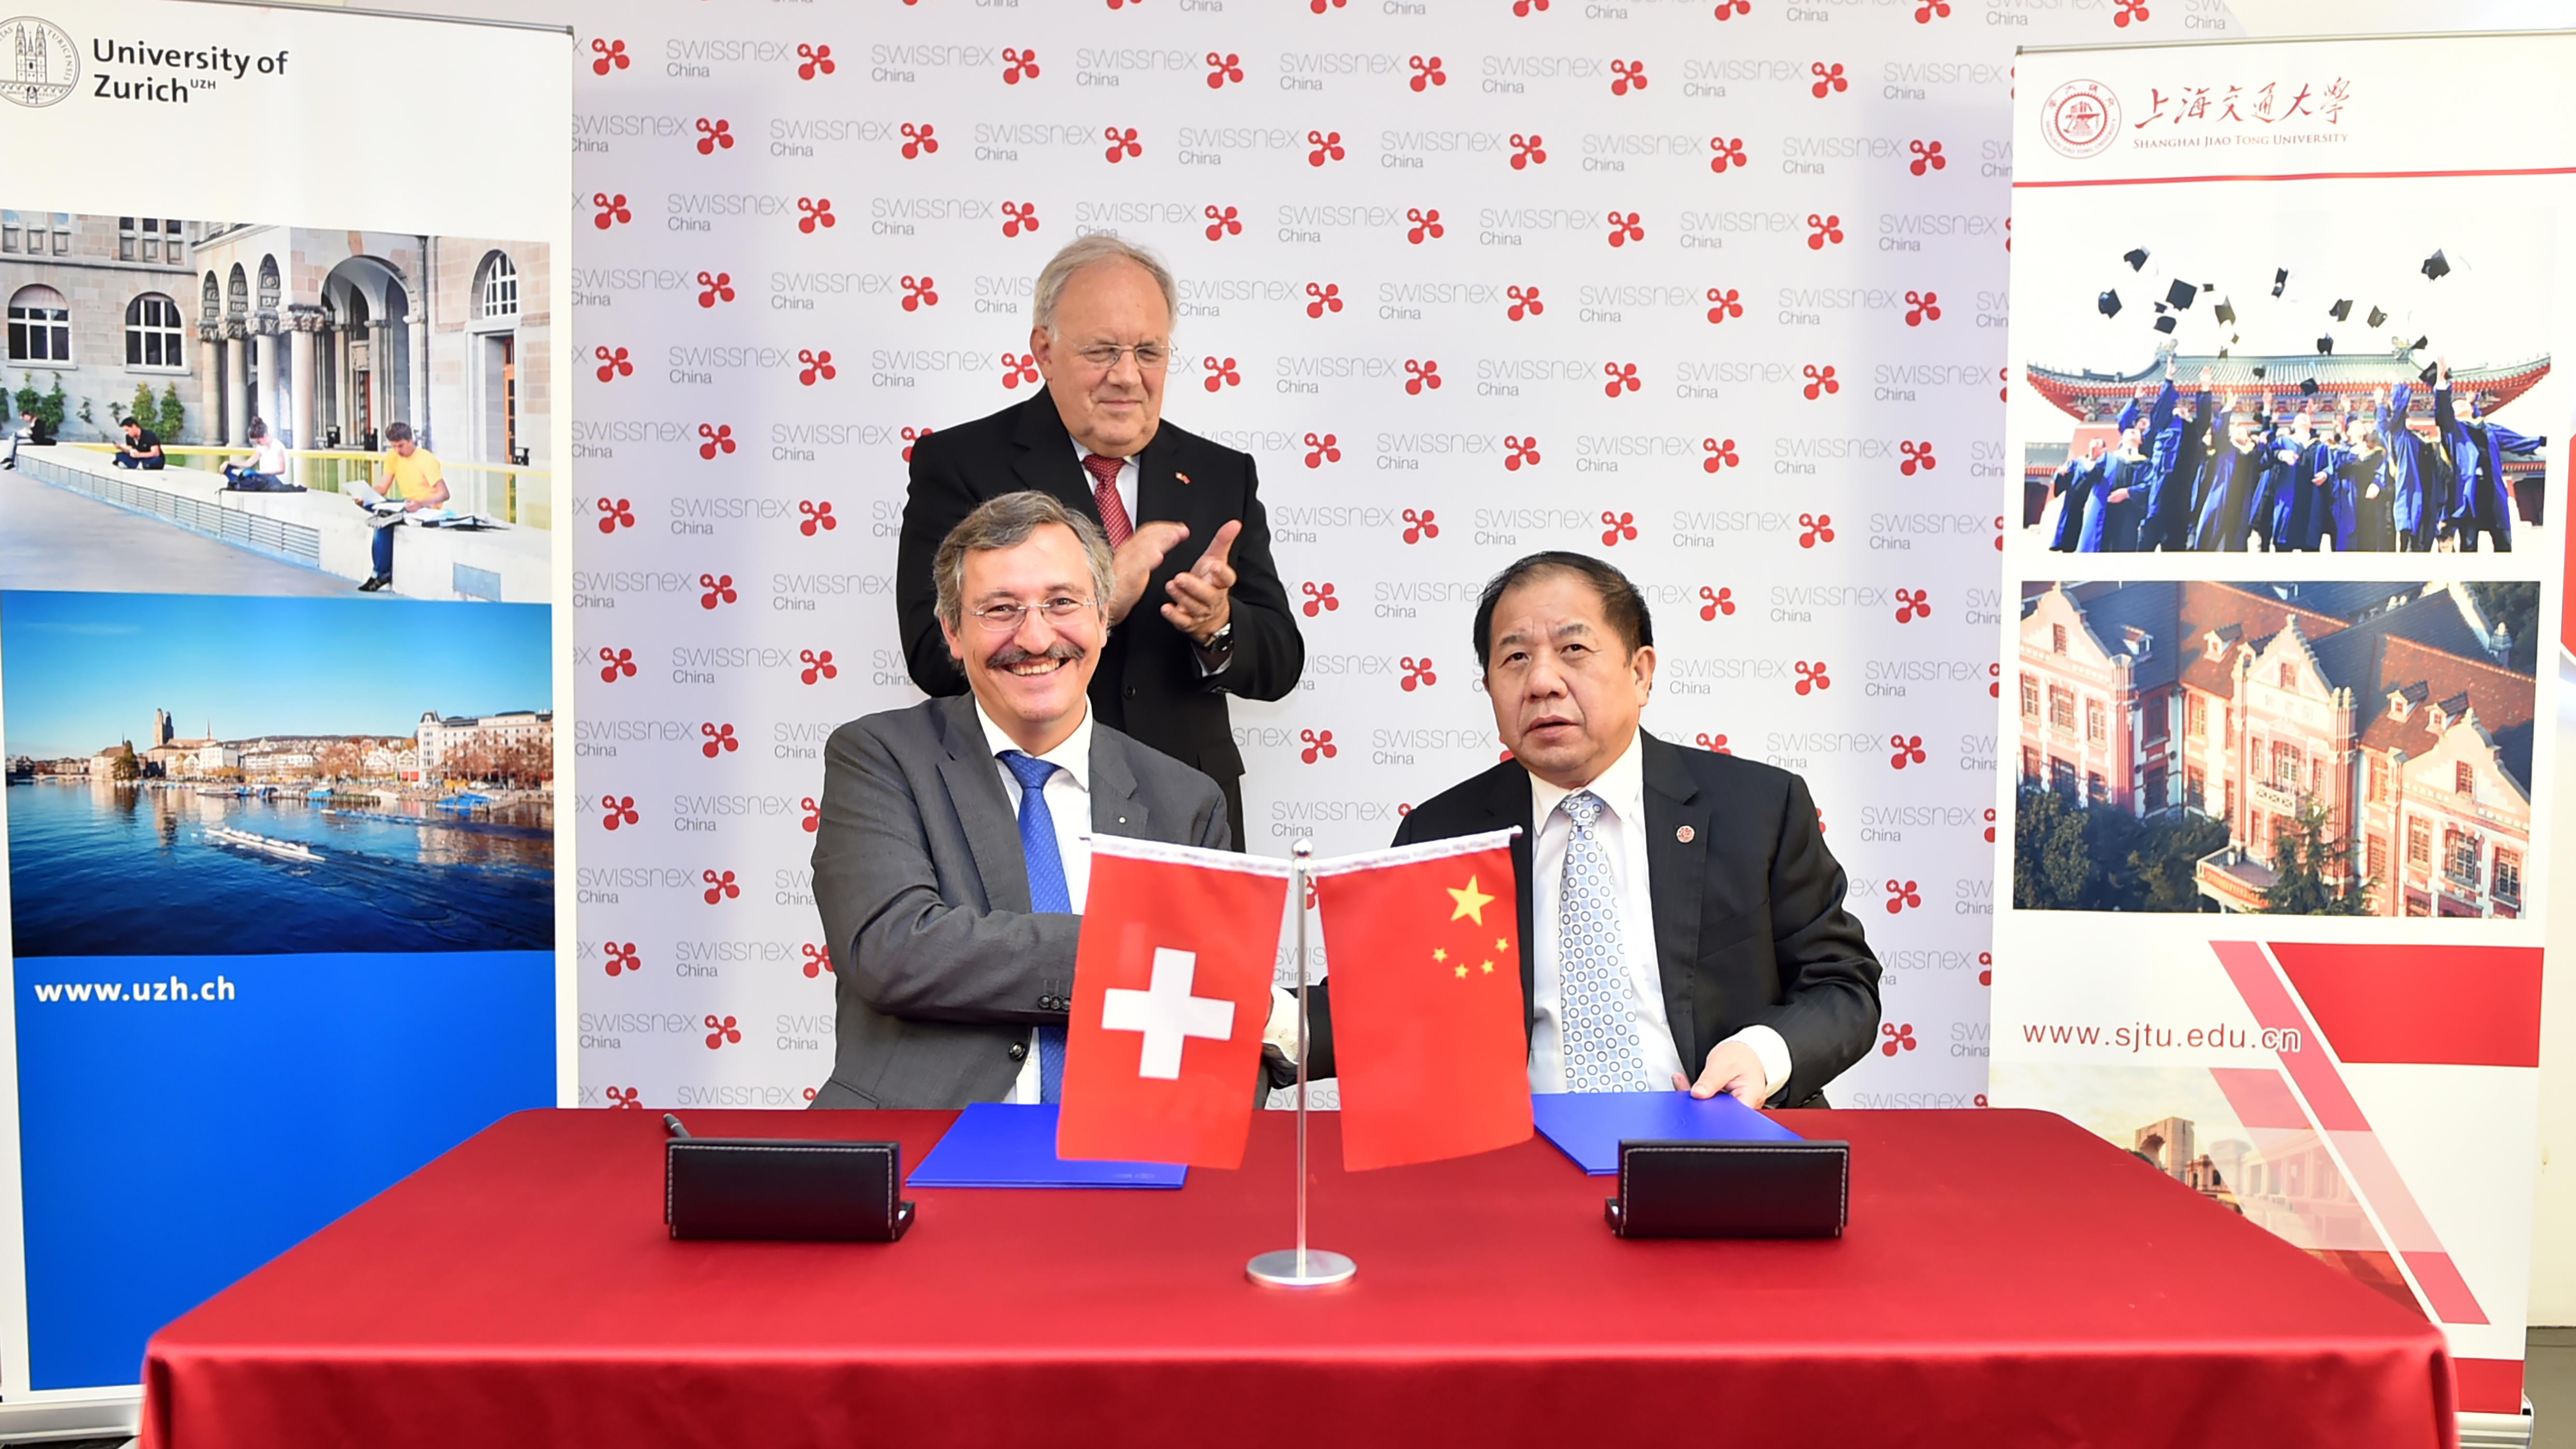 <p>Fostering international relations was one of Michael Hengartner&rsquo;s core goals in his time as president. Here he is pictured with Lin Zhongqin, president of Jiaotong University Shanghai (SJTU), signing an exchange agreement in September 2018. In the background is then federal councilor Johann Schneider-Ammann.</p> (Image: Swissnex China)